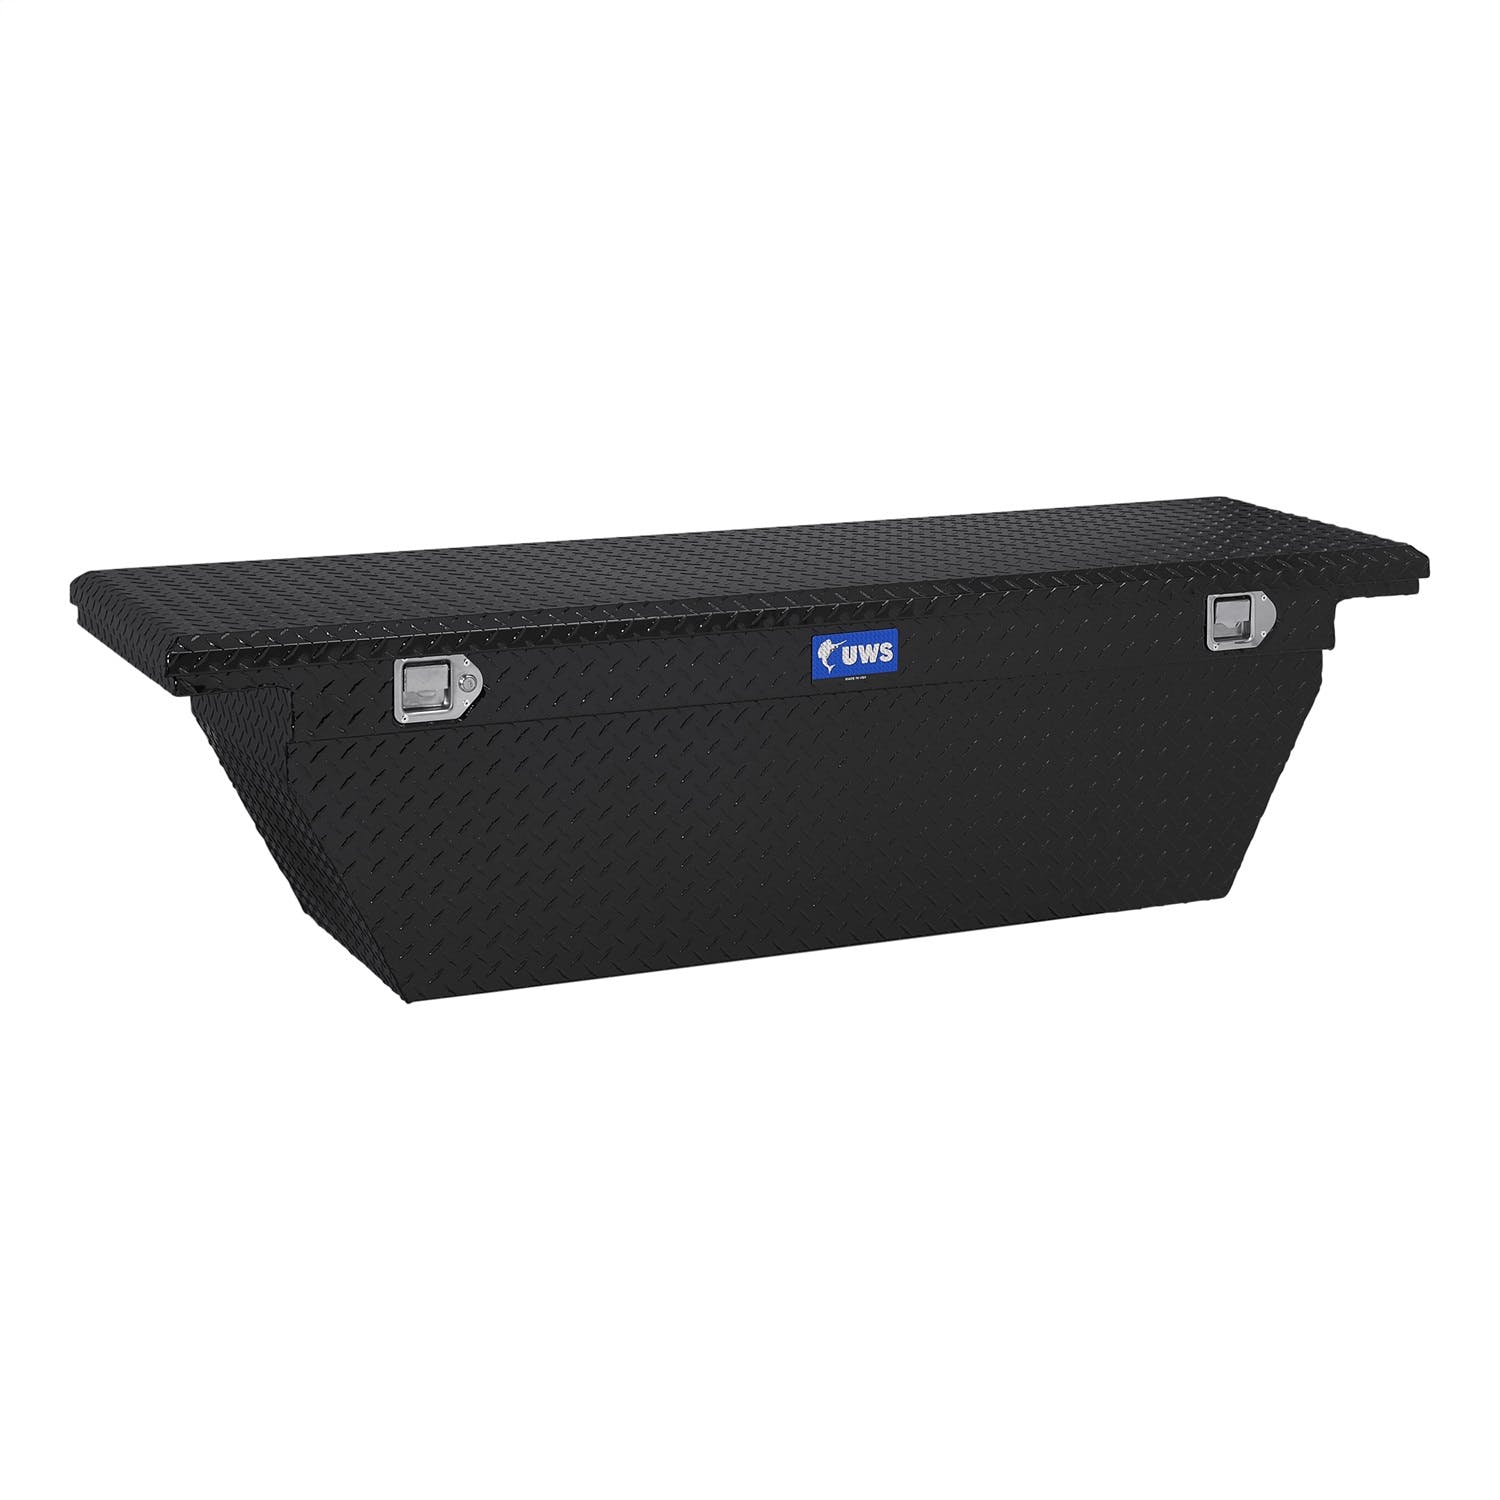 UWS TBSD-72-A-LP-B 72 inch Aluminum Single Lid Crossover Toolbox Deep Low Profile Angled Black